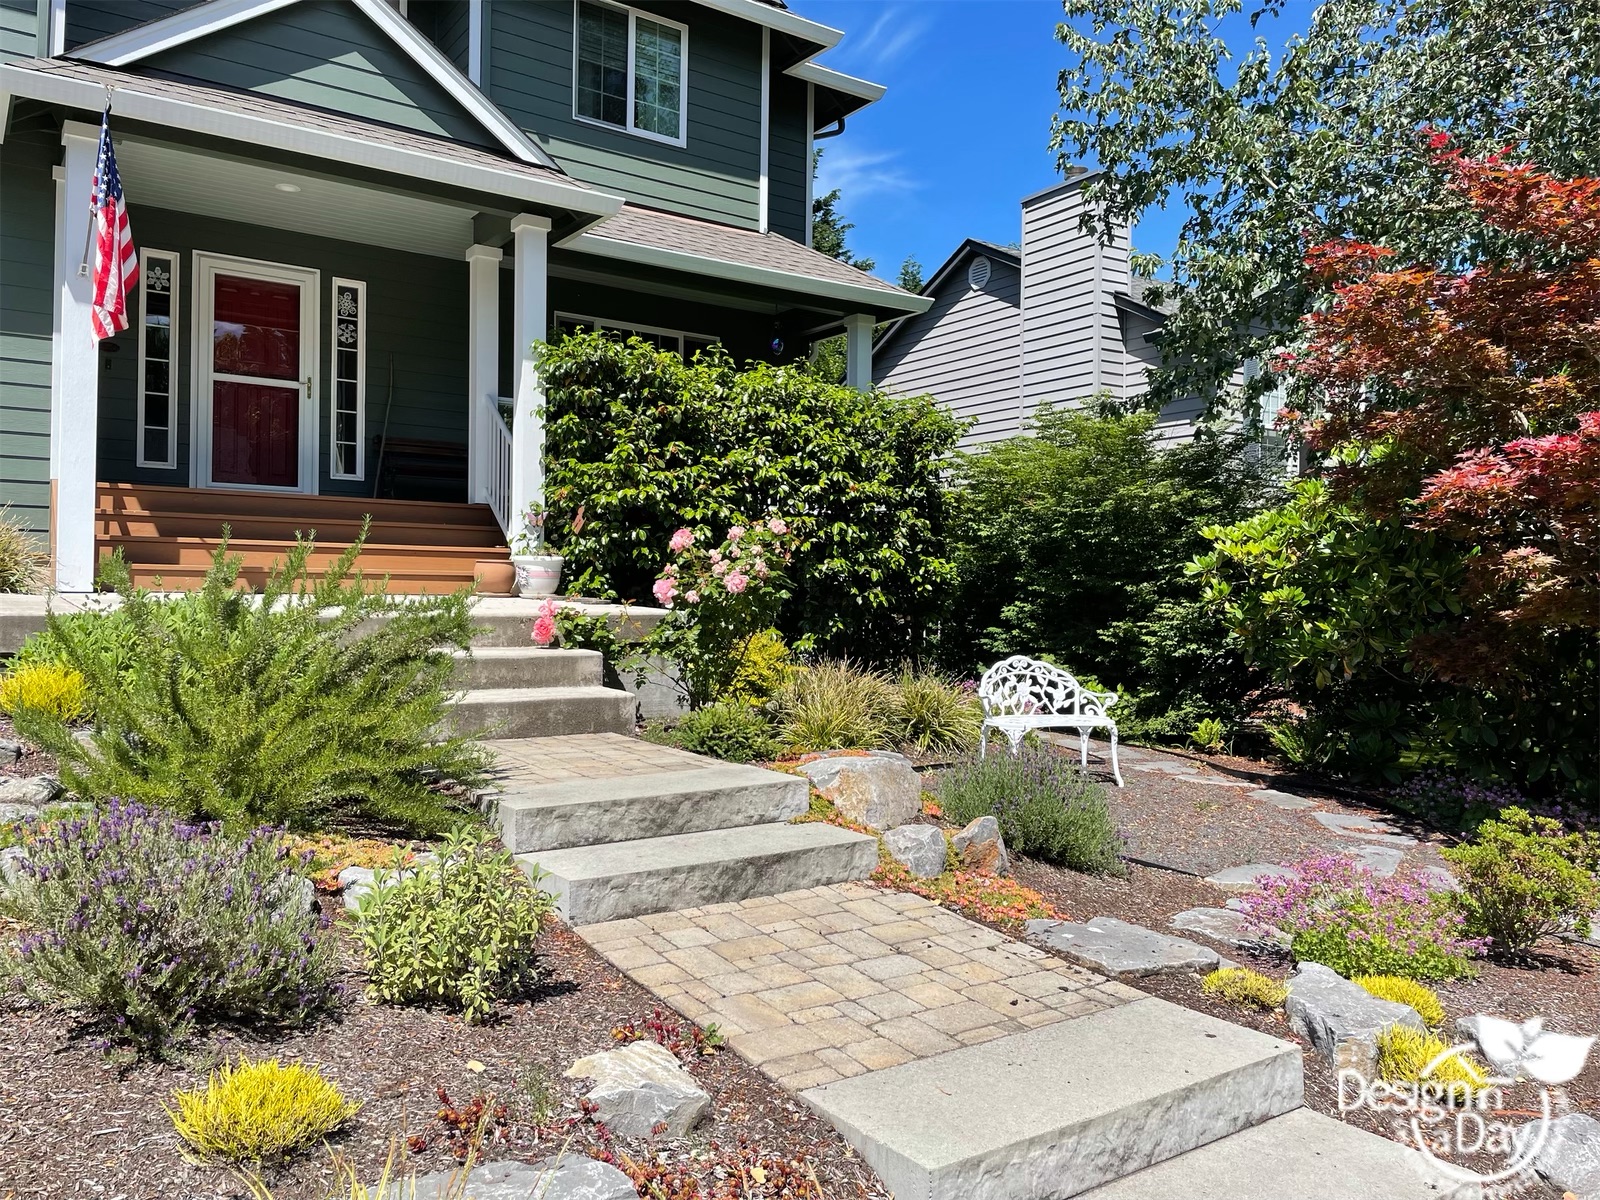 No Grass Front Yard Archives, How To Landscape A Front Yard Without Grass